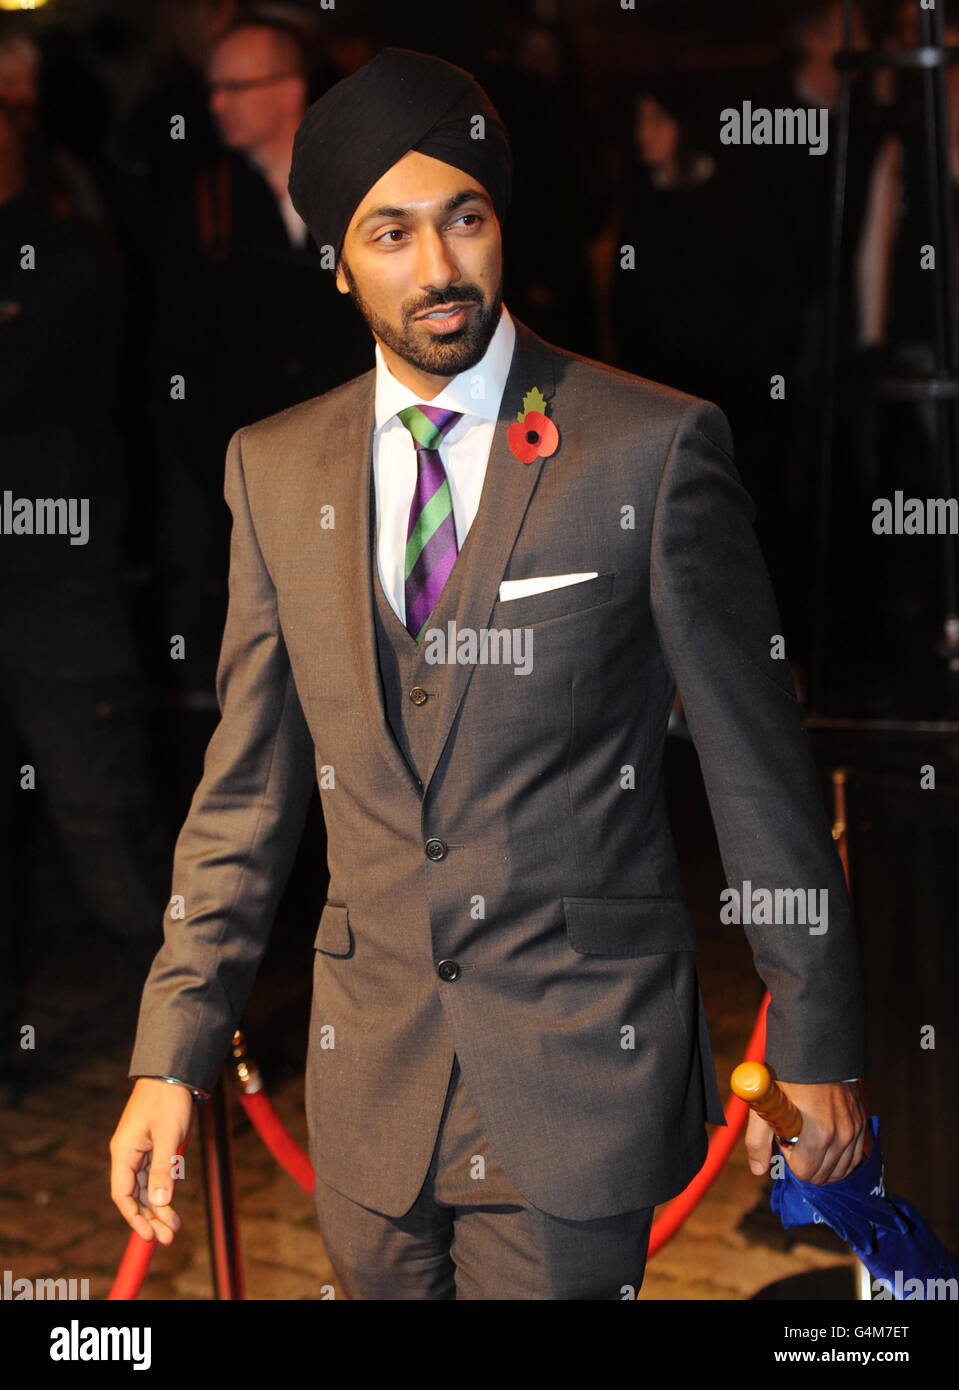 Kulveer Ranger arriving at The 1000 - London's Most Influential People event held at the London Transport Museum, London. Stock Photo